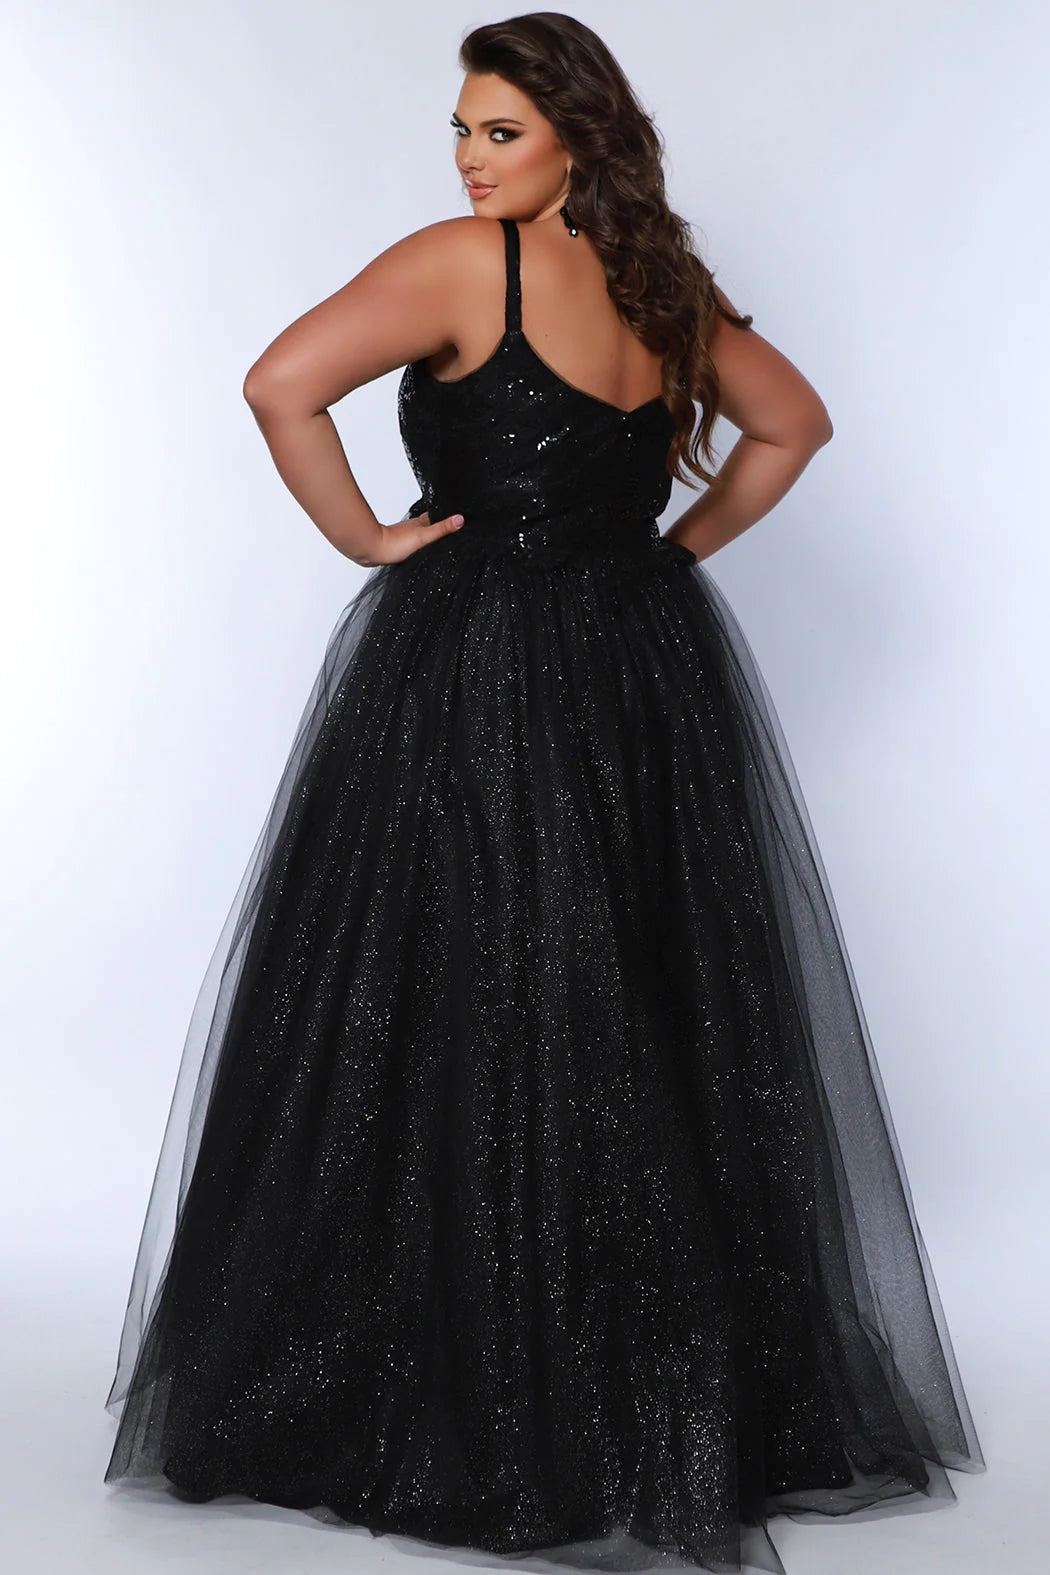 This plus-size evening gown from Sydneys Closet features a glamorous sequin-encrusted bodice, a V-neckline, and an A-line skirt for a modern, flattering silhouette. Crafted from luxurious fabrics, this formal gown is perfect for special occasions. 